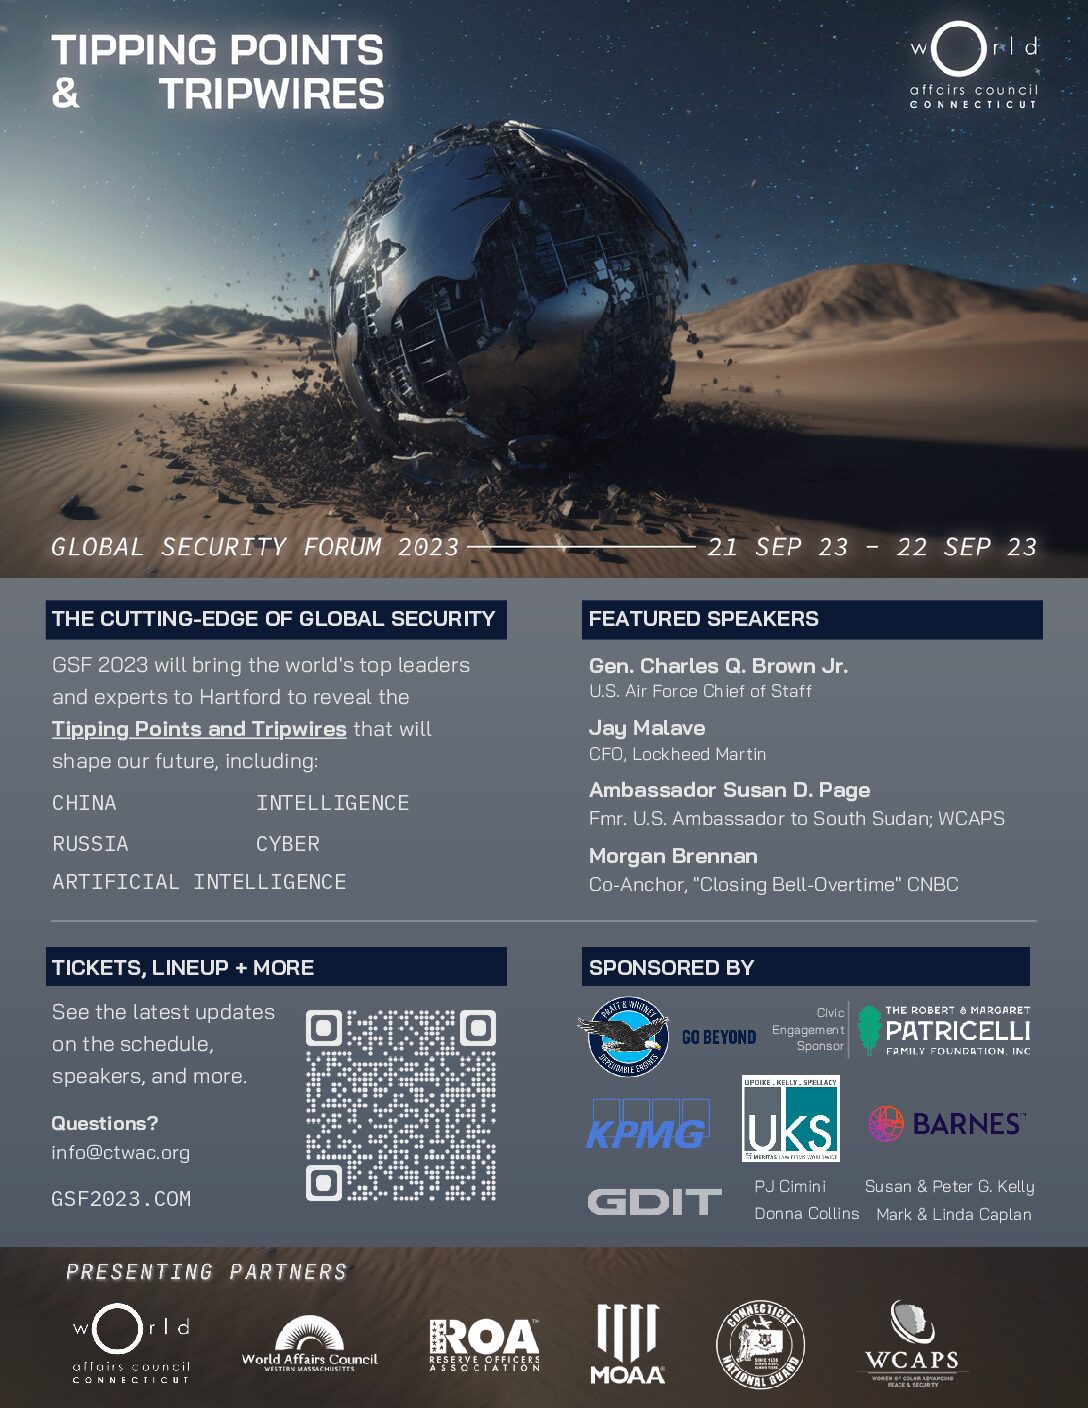 Partner Event: Global Security Forum 2023: Tipping Points & Tripwires